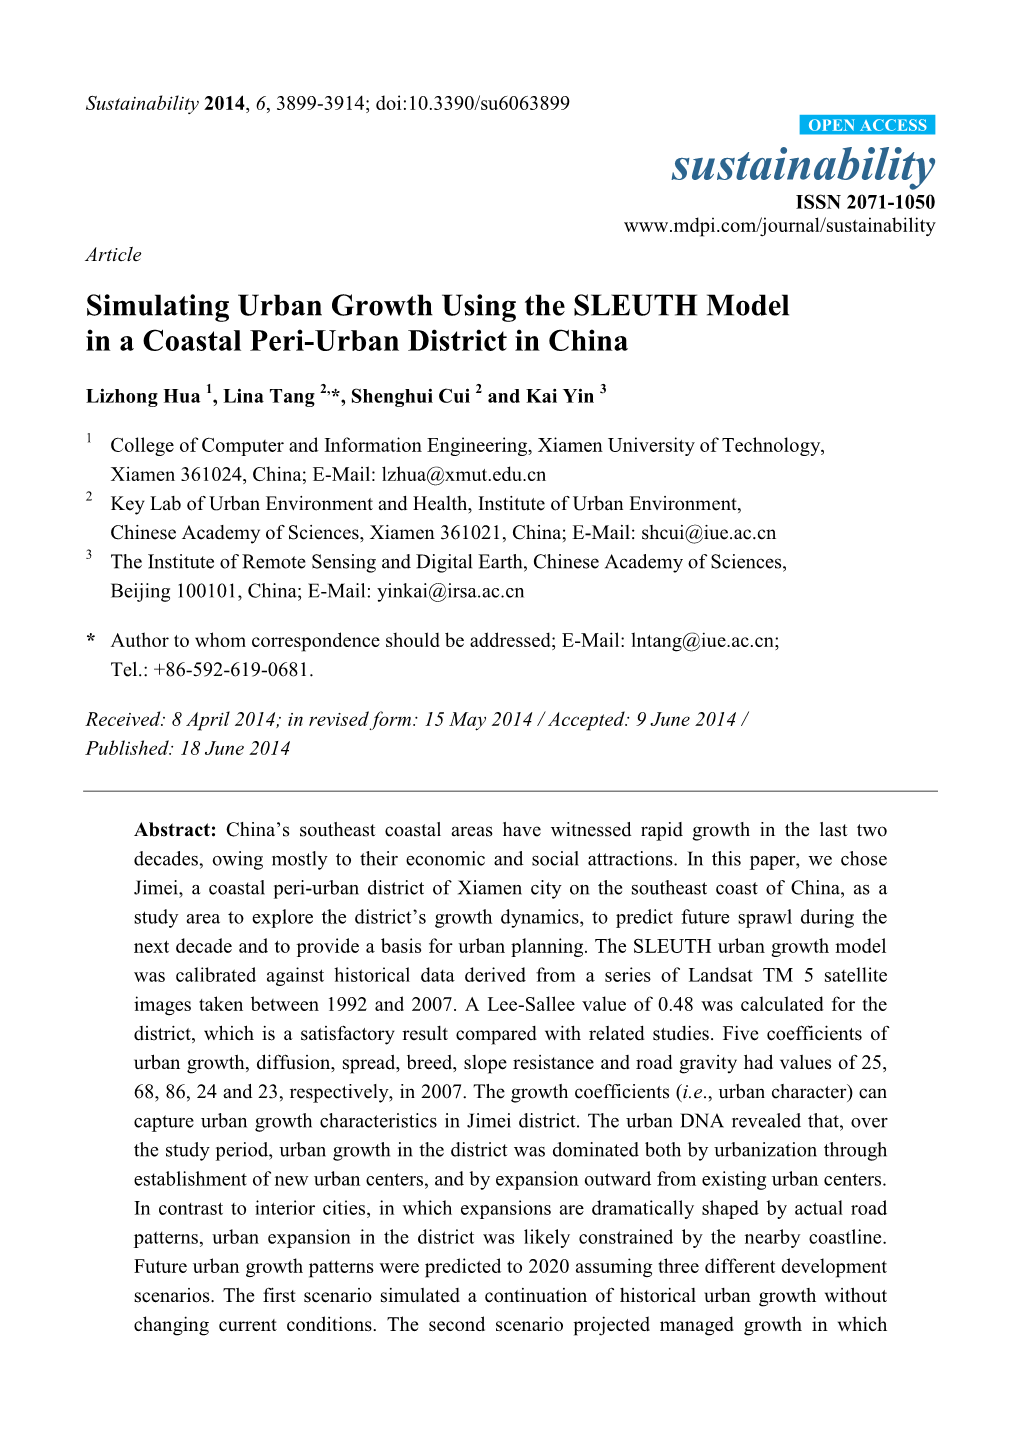 Simulating Urban Growth Using the SLEUTH Model in a Coastal Peri-Urban District in China